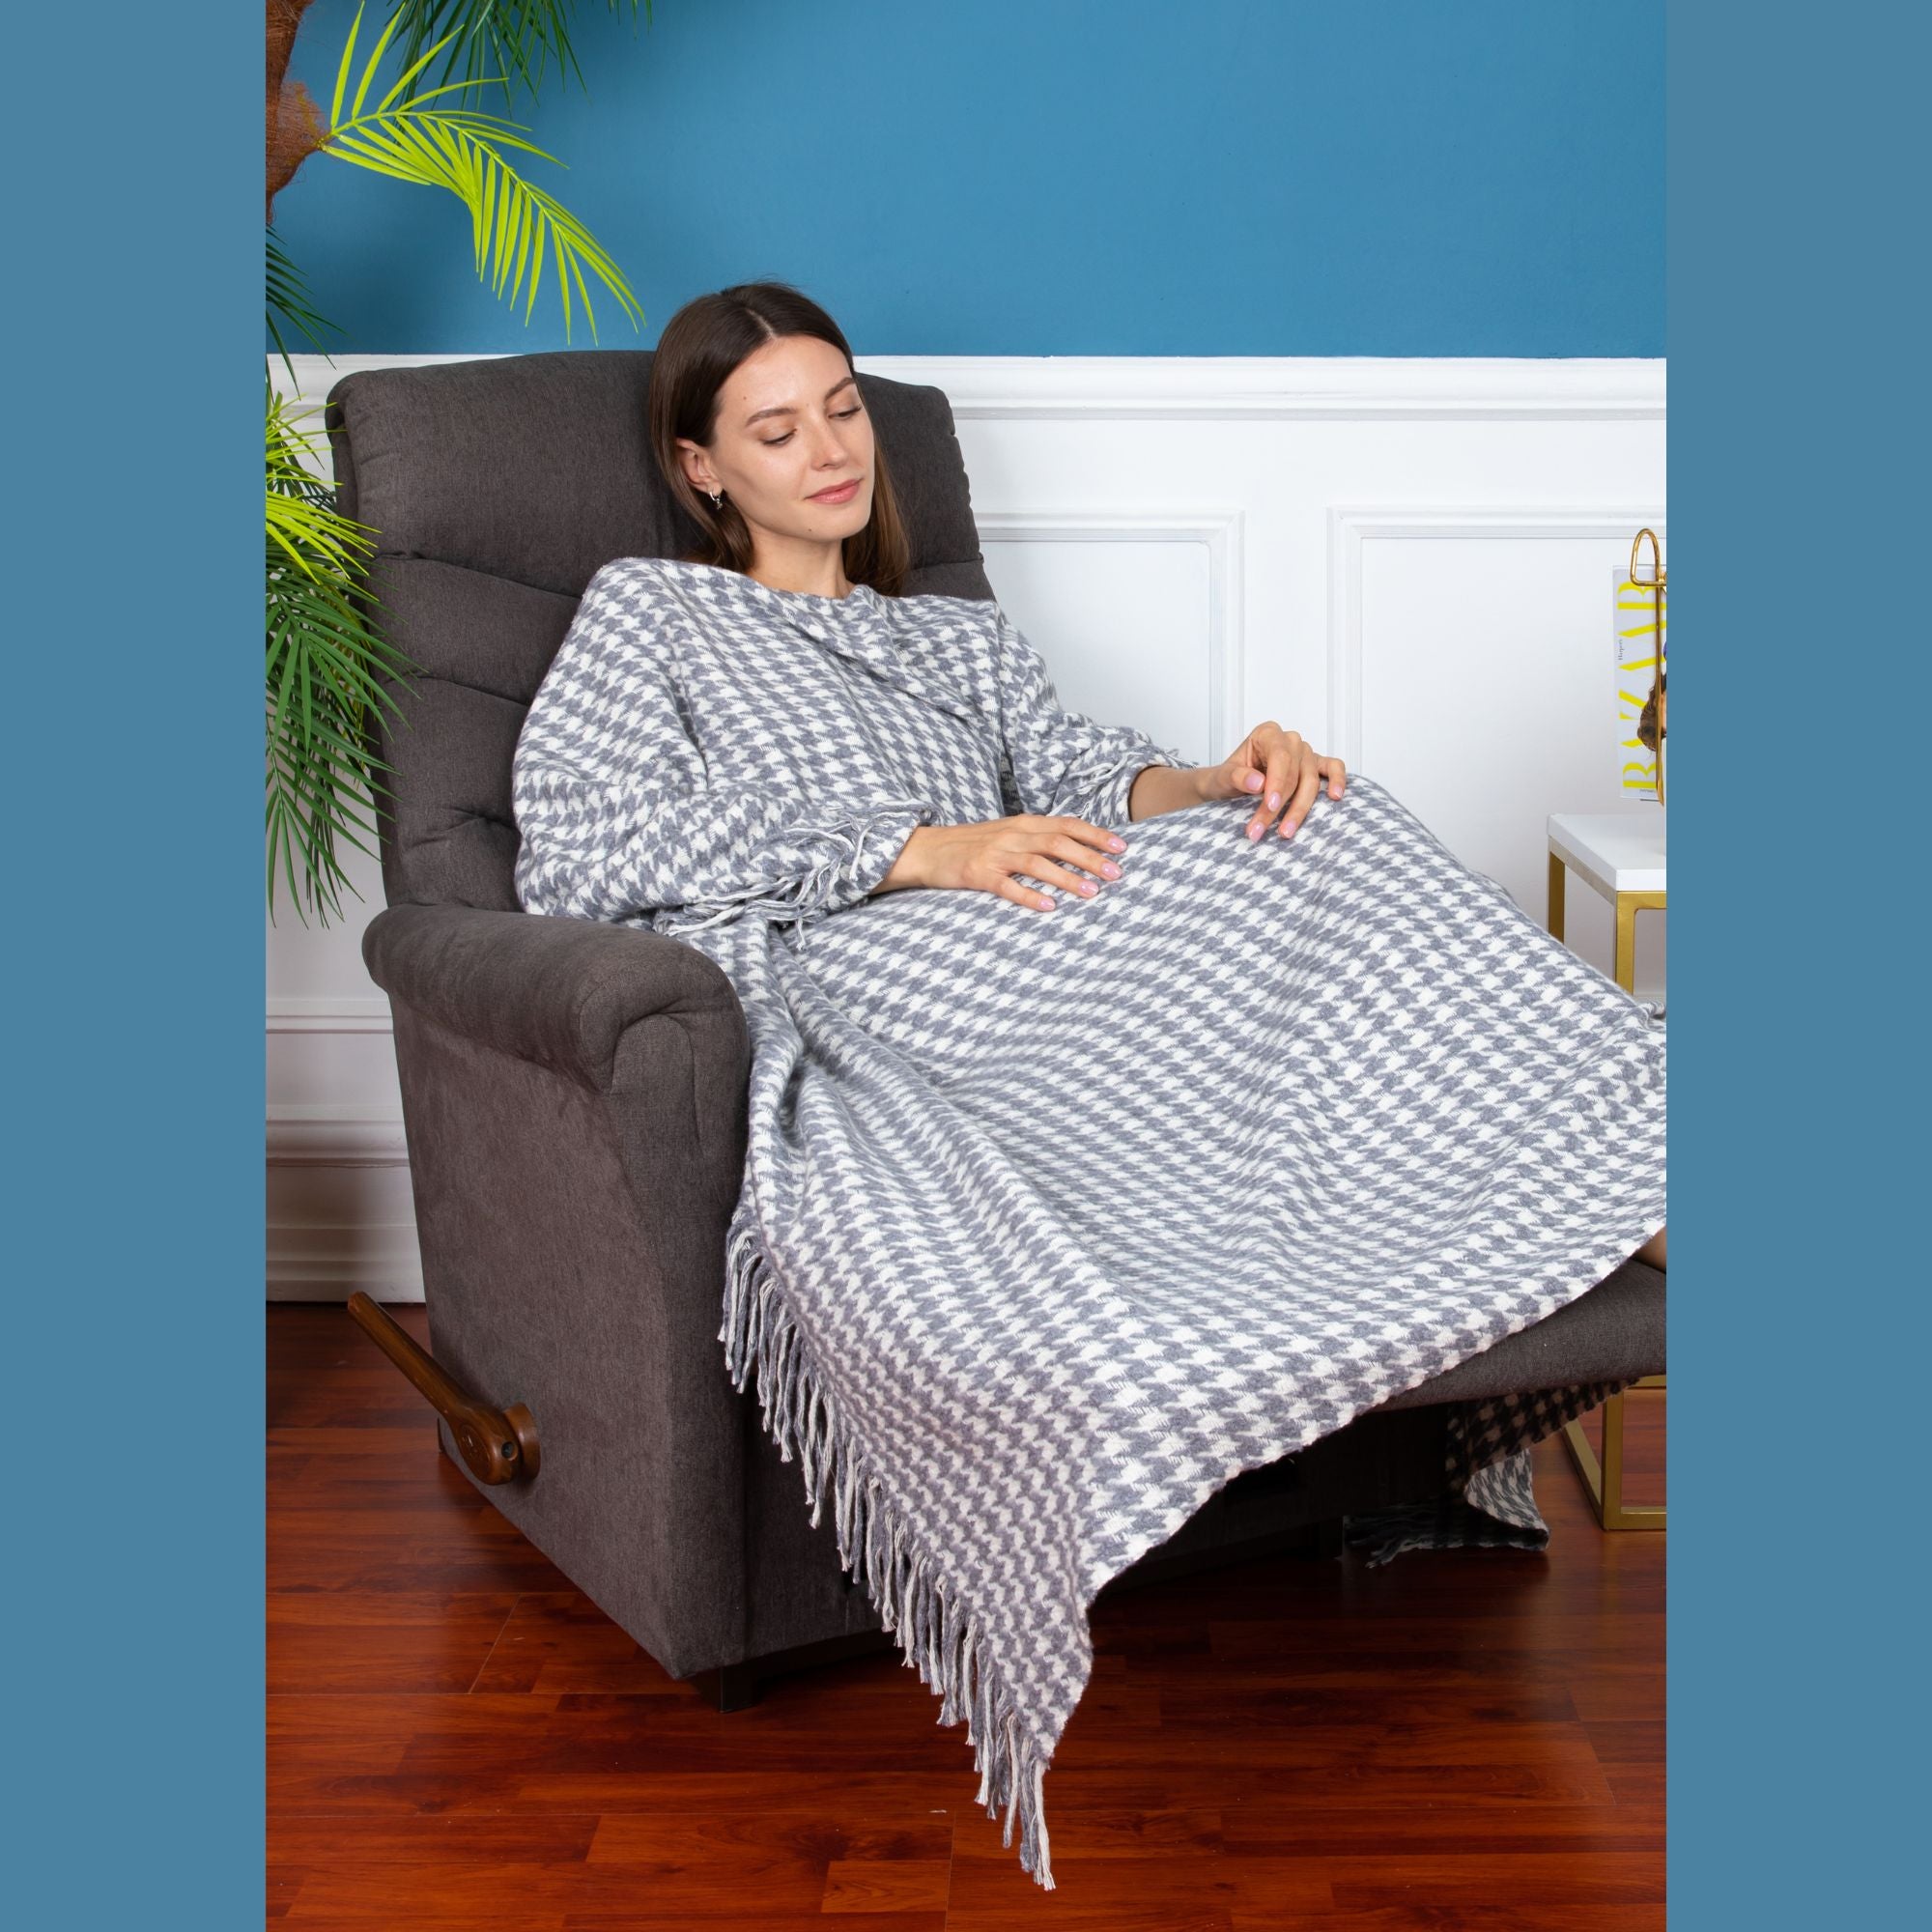 Trimita | Relaxed girl sitting on a sofa, enveloped in the Grey Houndstooth Luxury Throw Blanket, portraying its softness and warmth